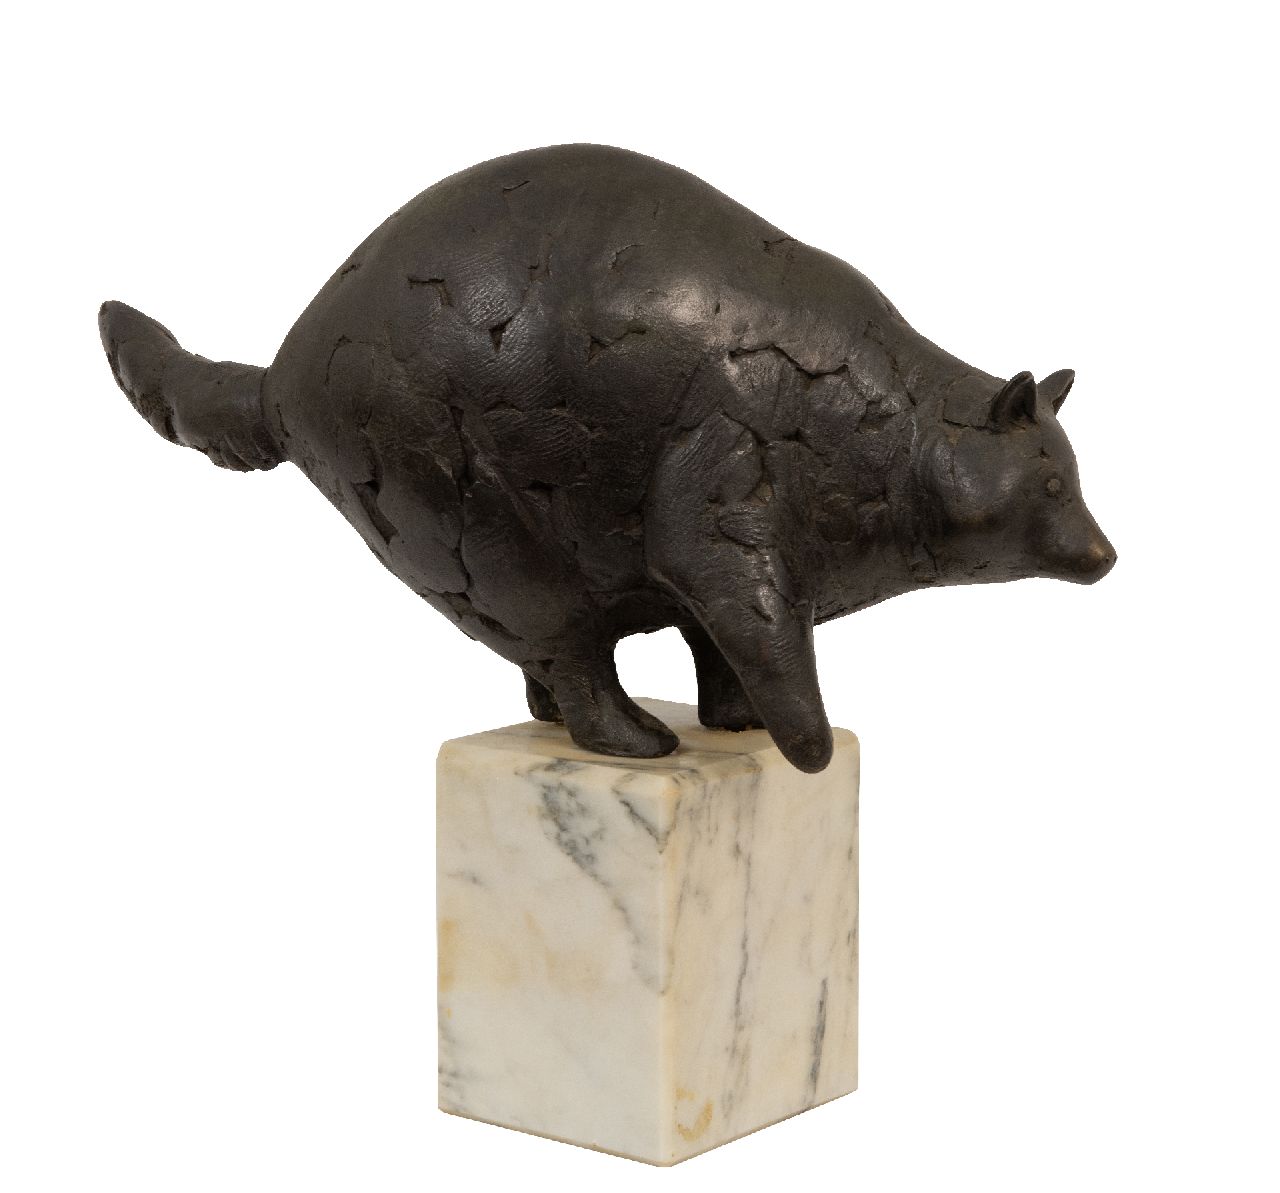 Hartog E. den | Evert den Hartog | Sculptures and objects offered for sale | Bear, bronze 26.0 x 29.5 cm, signed on base with initials